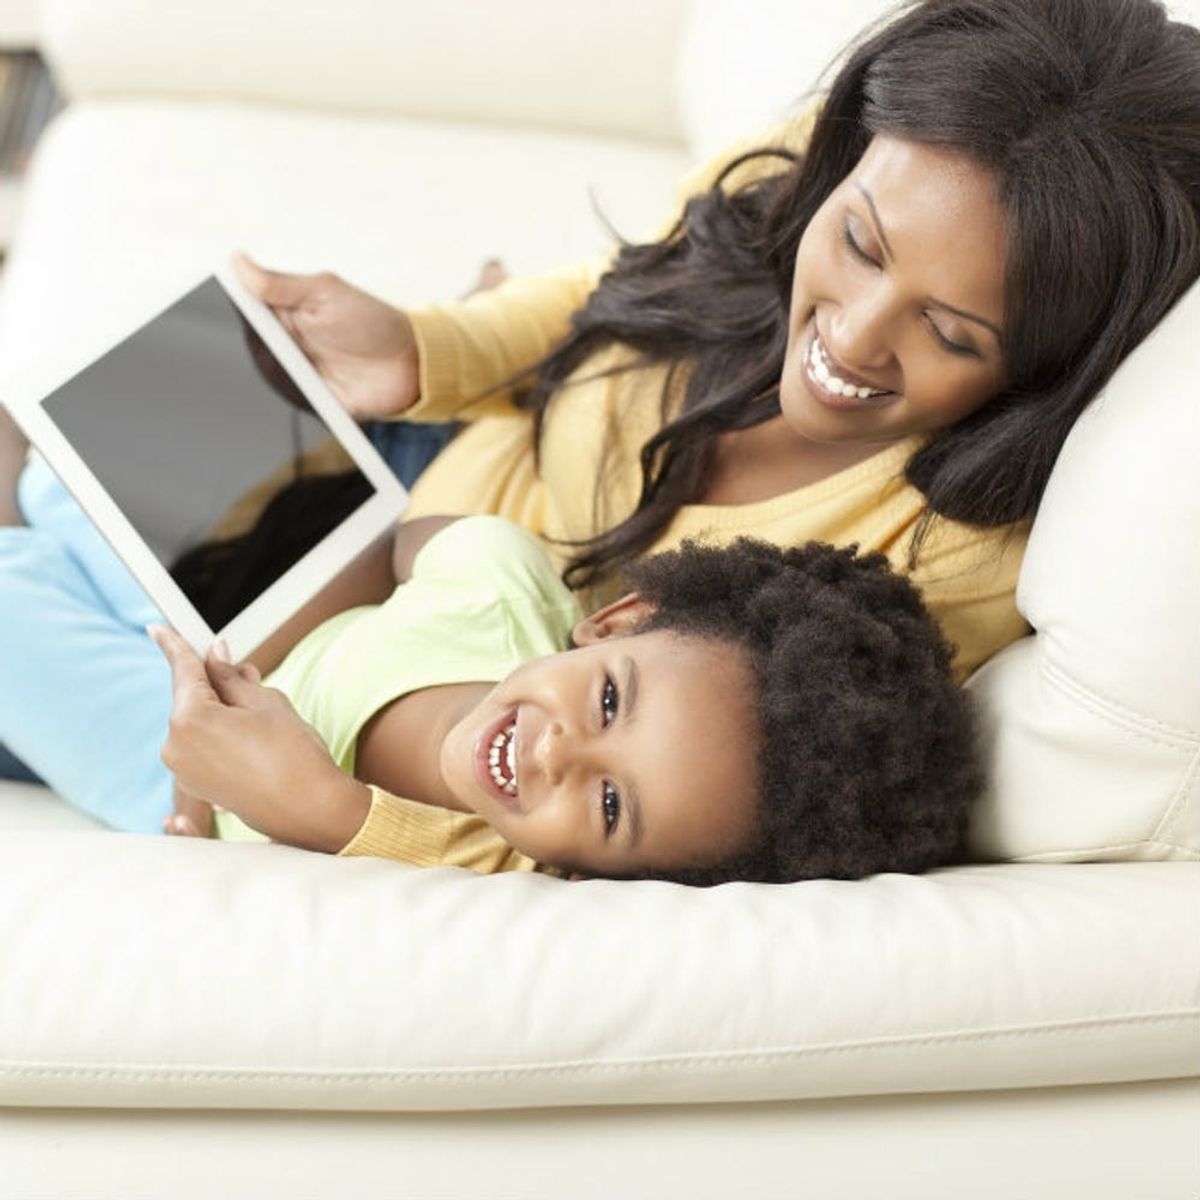 5 Tips for Starting Young Kids Out on Social Media